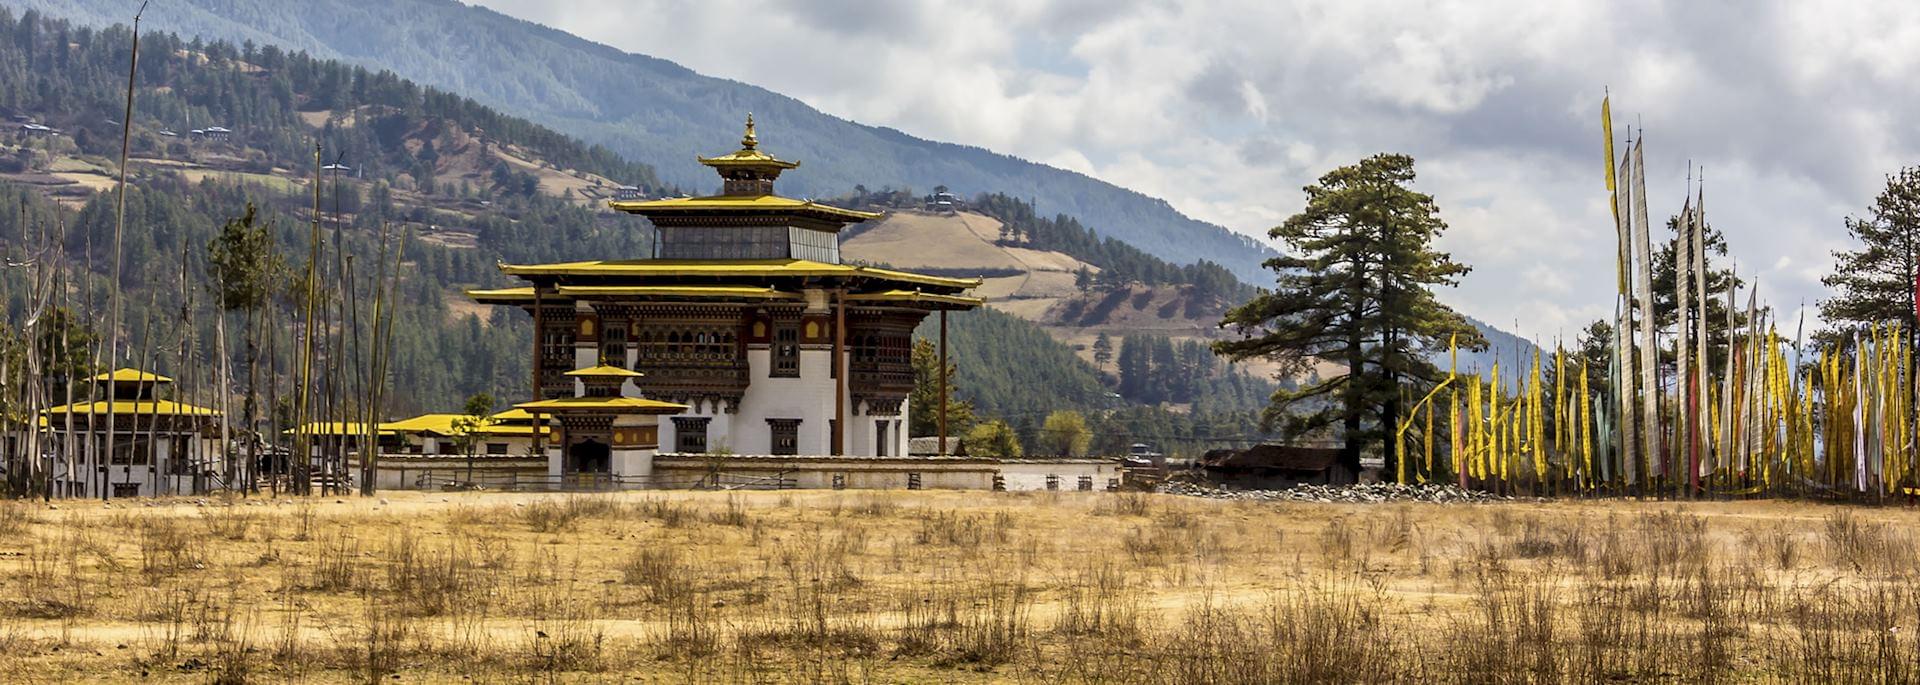 Bumthang Valley Overview